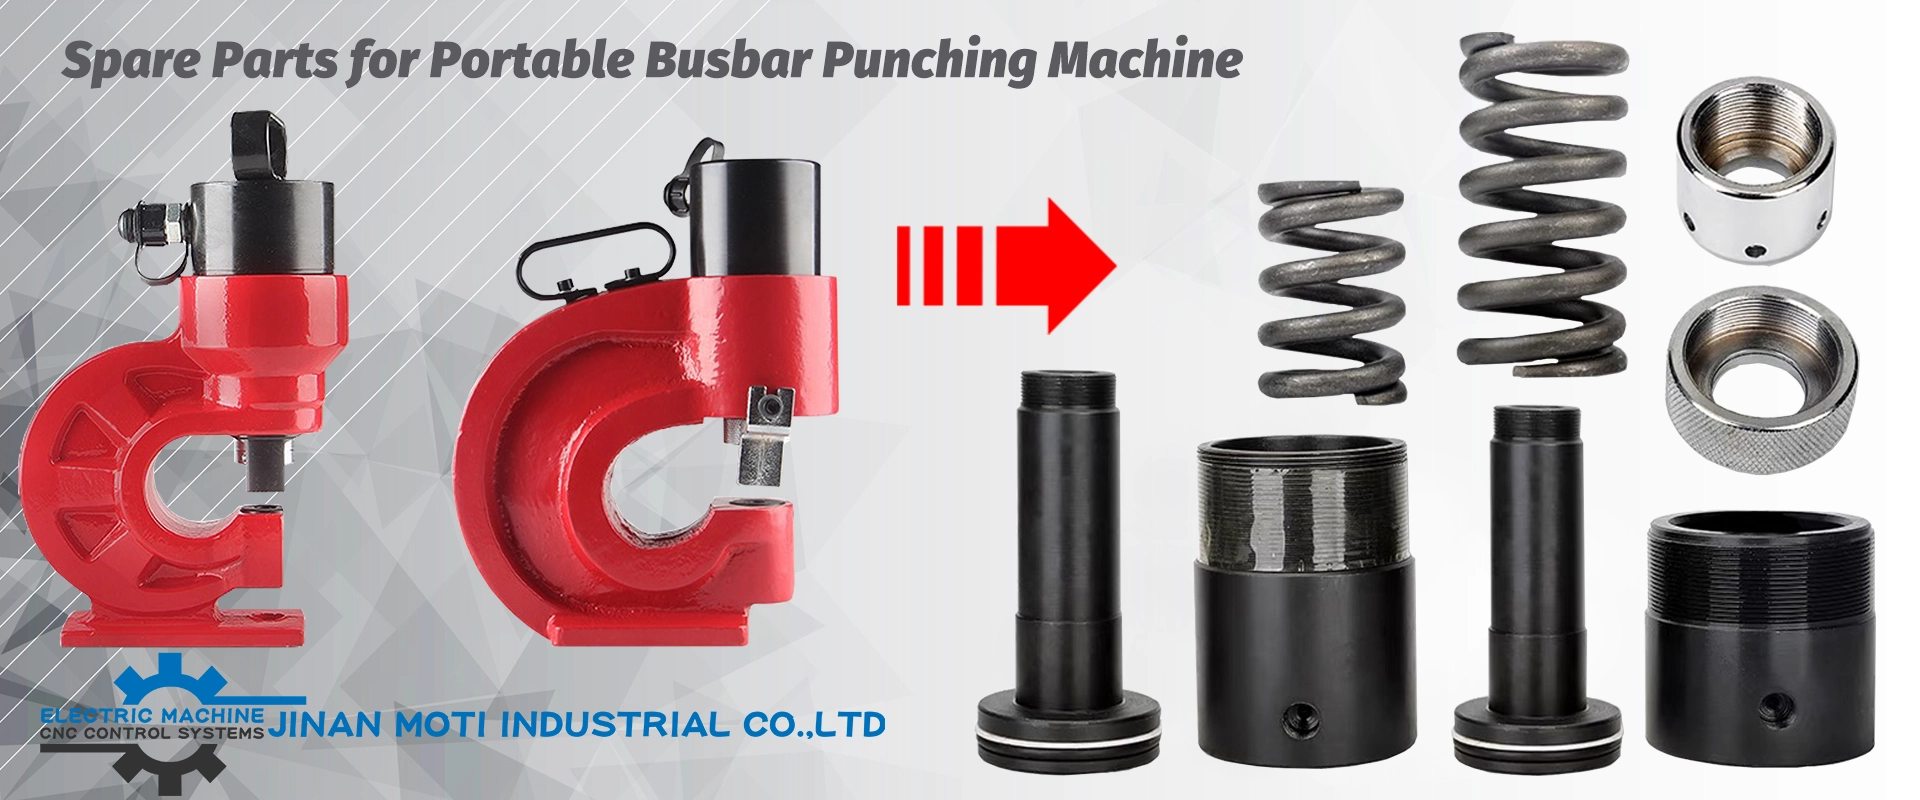 Spare Parts for Portable Busbar Punching Machine